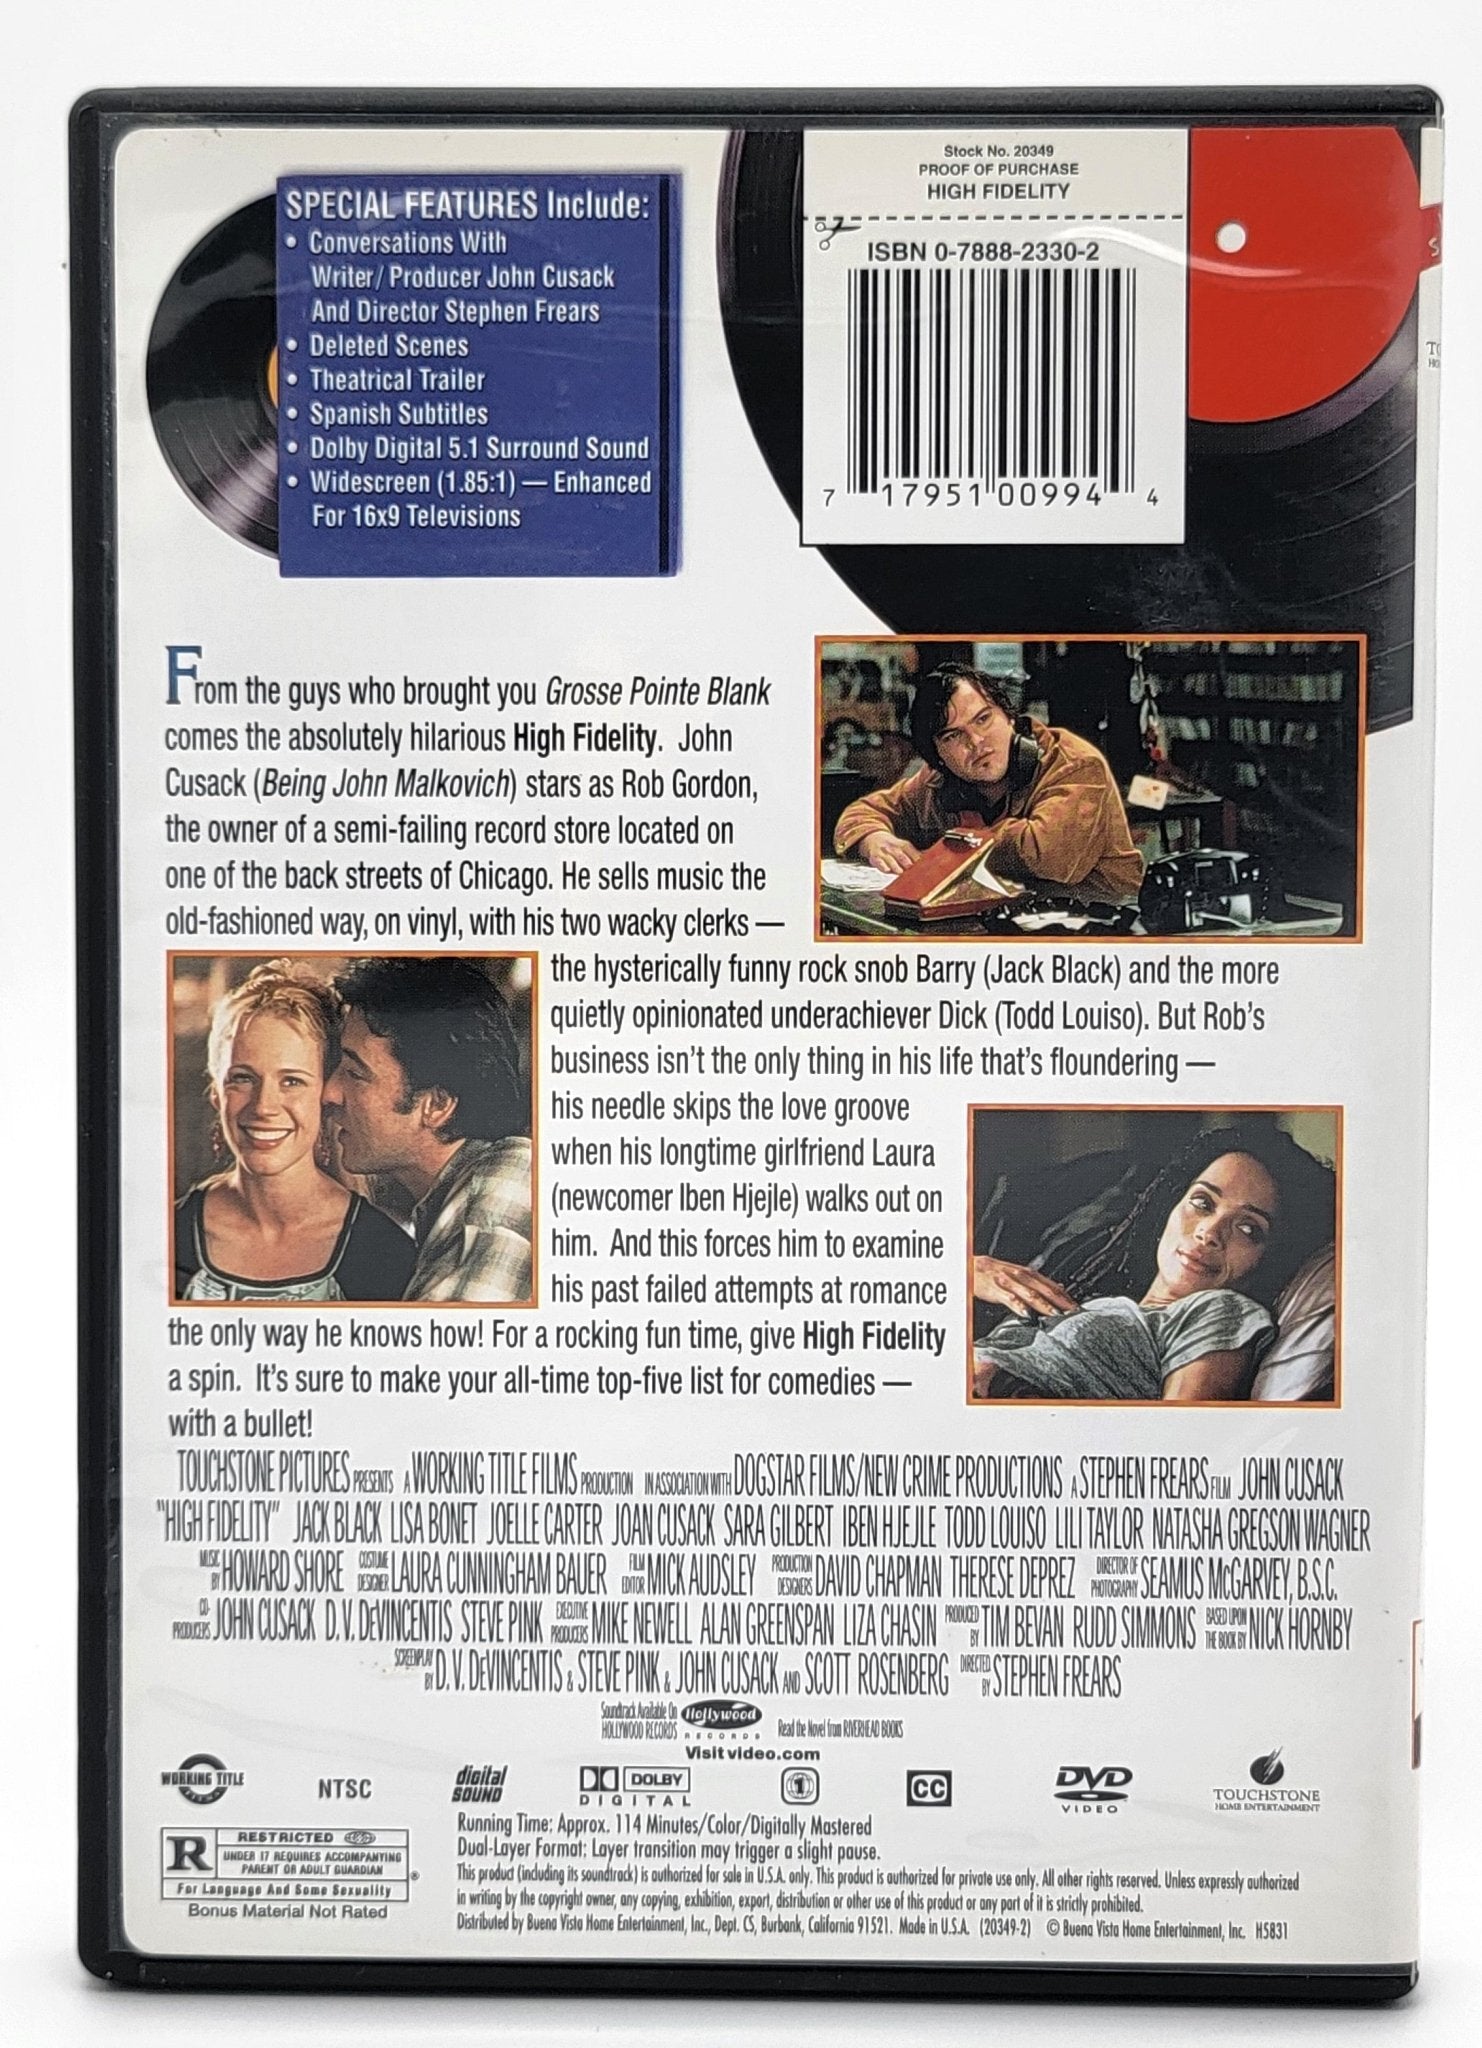 TOUCHSTONE PICTURES - High Fidelity | DVD | WideScreen - DVD - Steady Bunny Shop